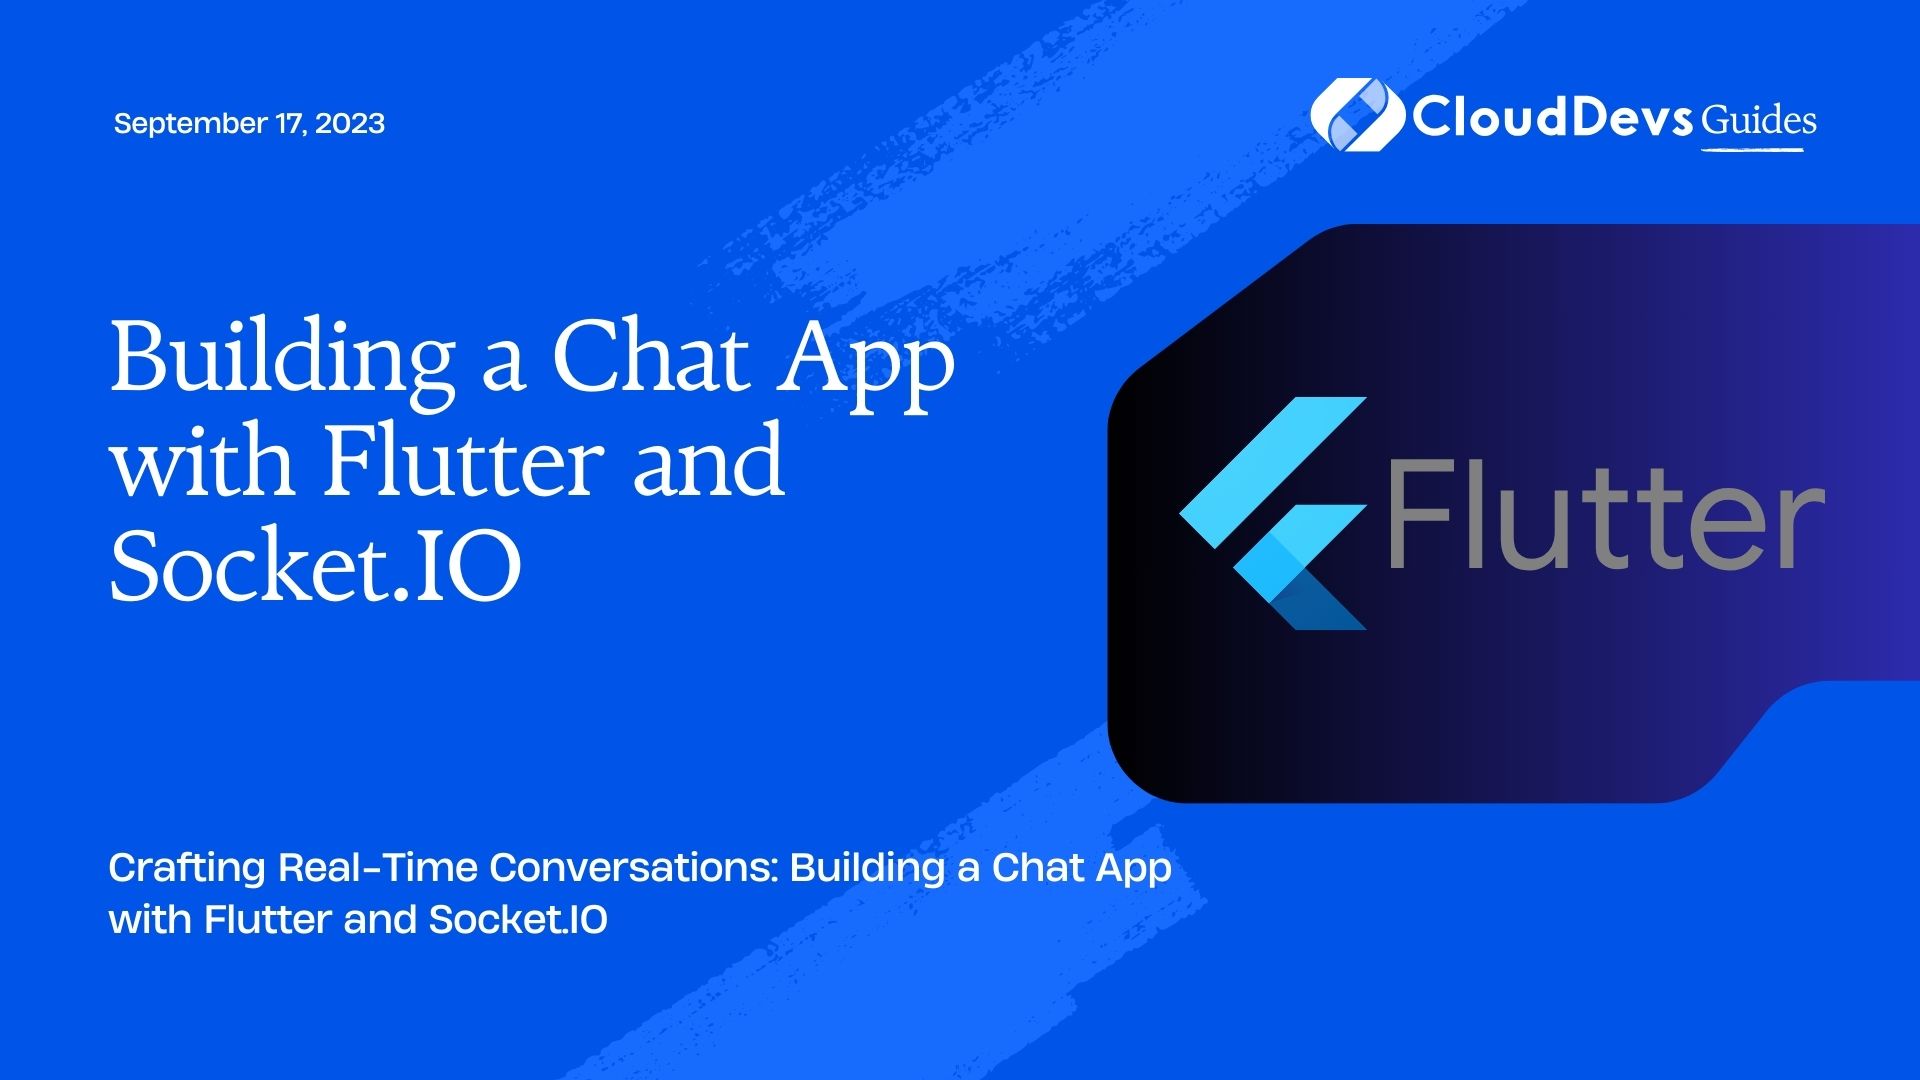 Building a Chat App with Flutter and Socket.IO